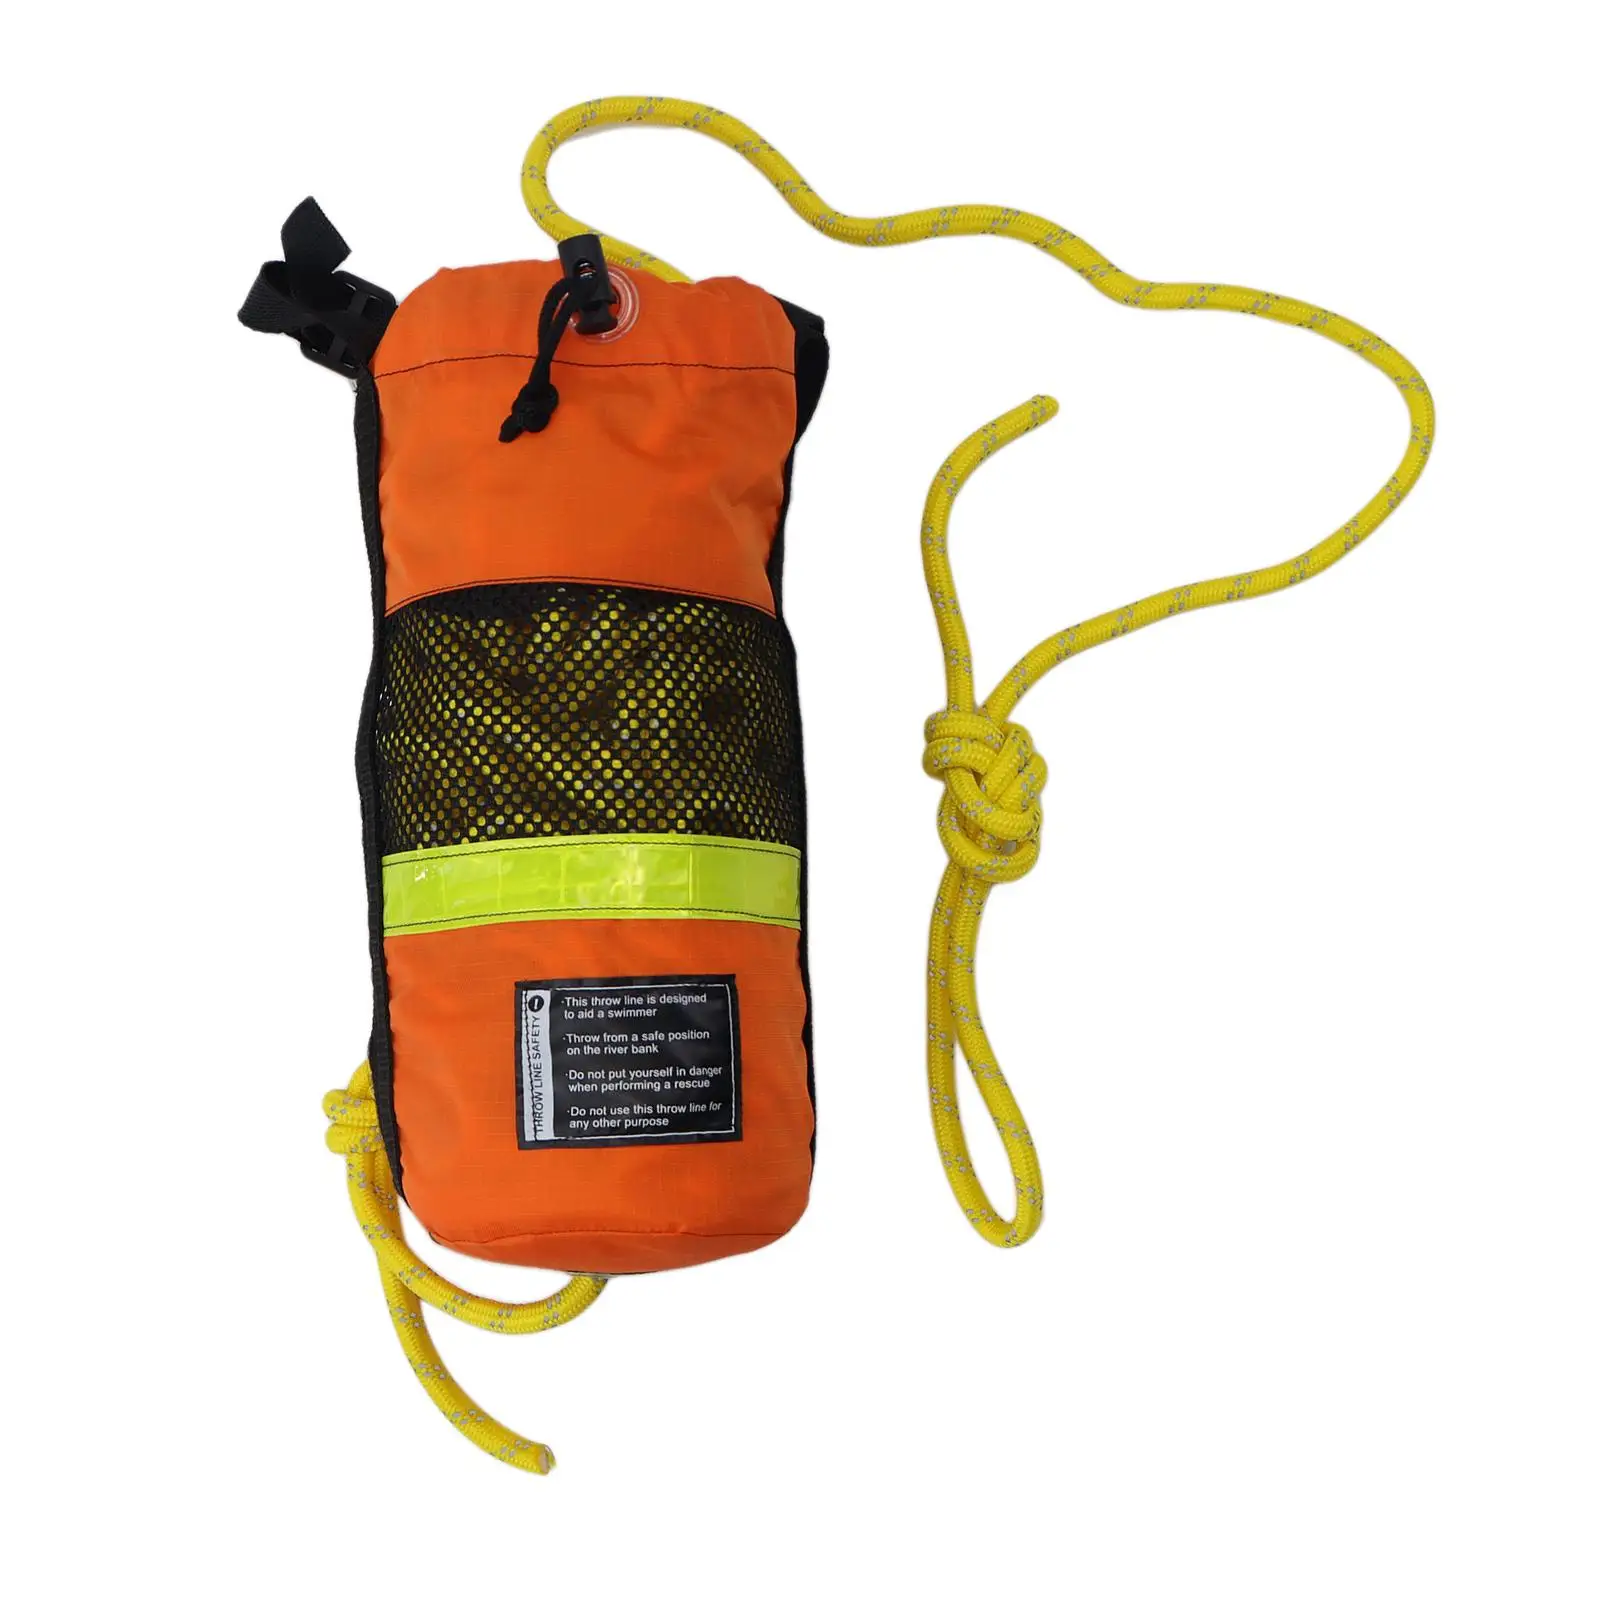 Throw Bag with Rope Rope Throwable Device Equipment Floating